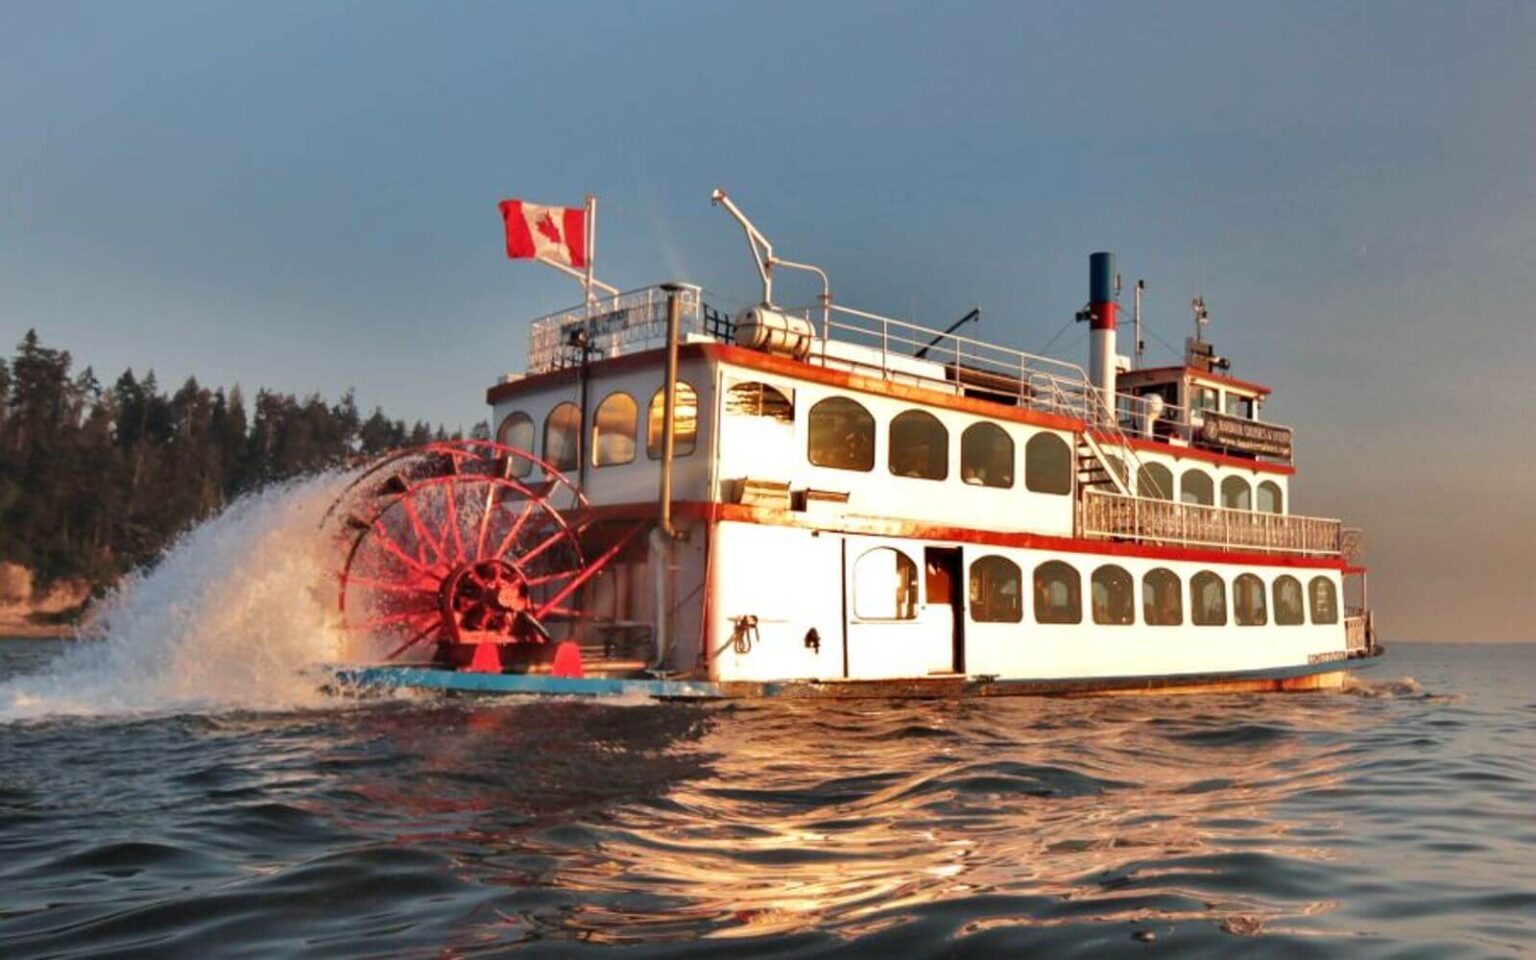 Vancouver Boat Tours Revealing the 5 Top Boat Cruises in Vancouver